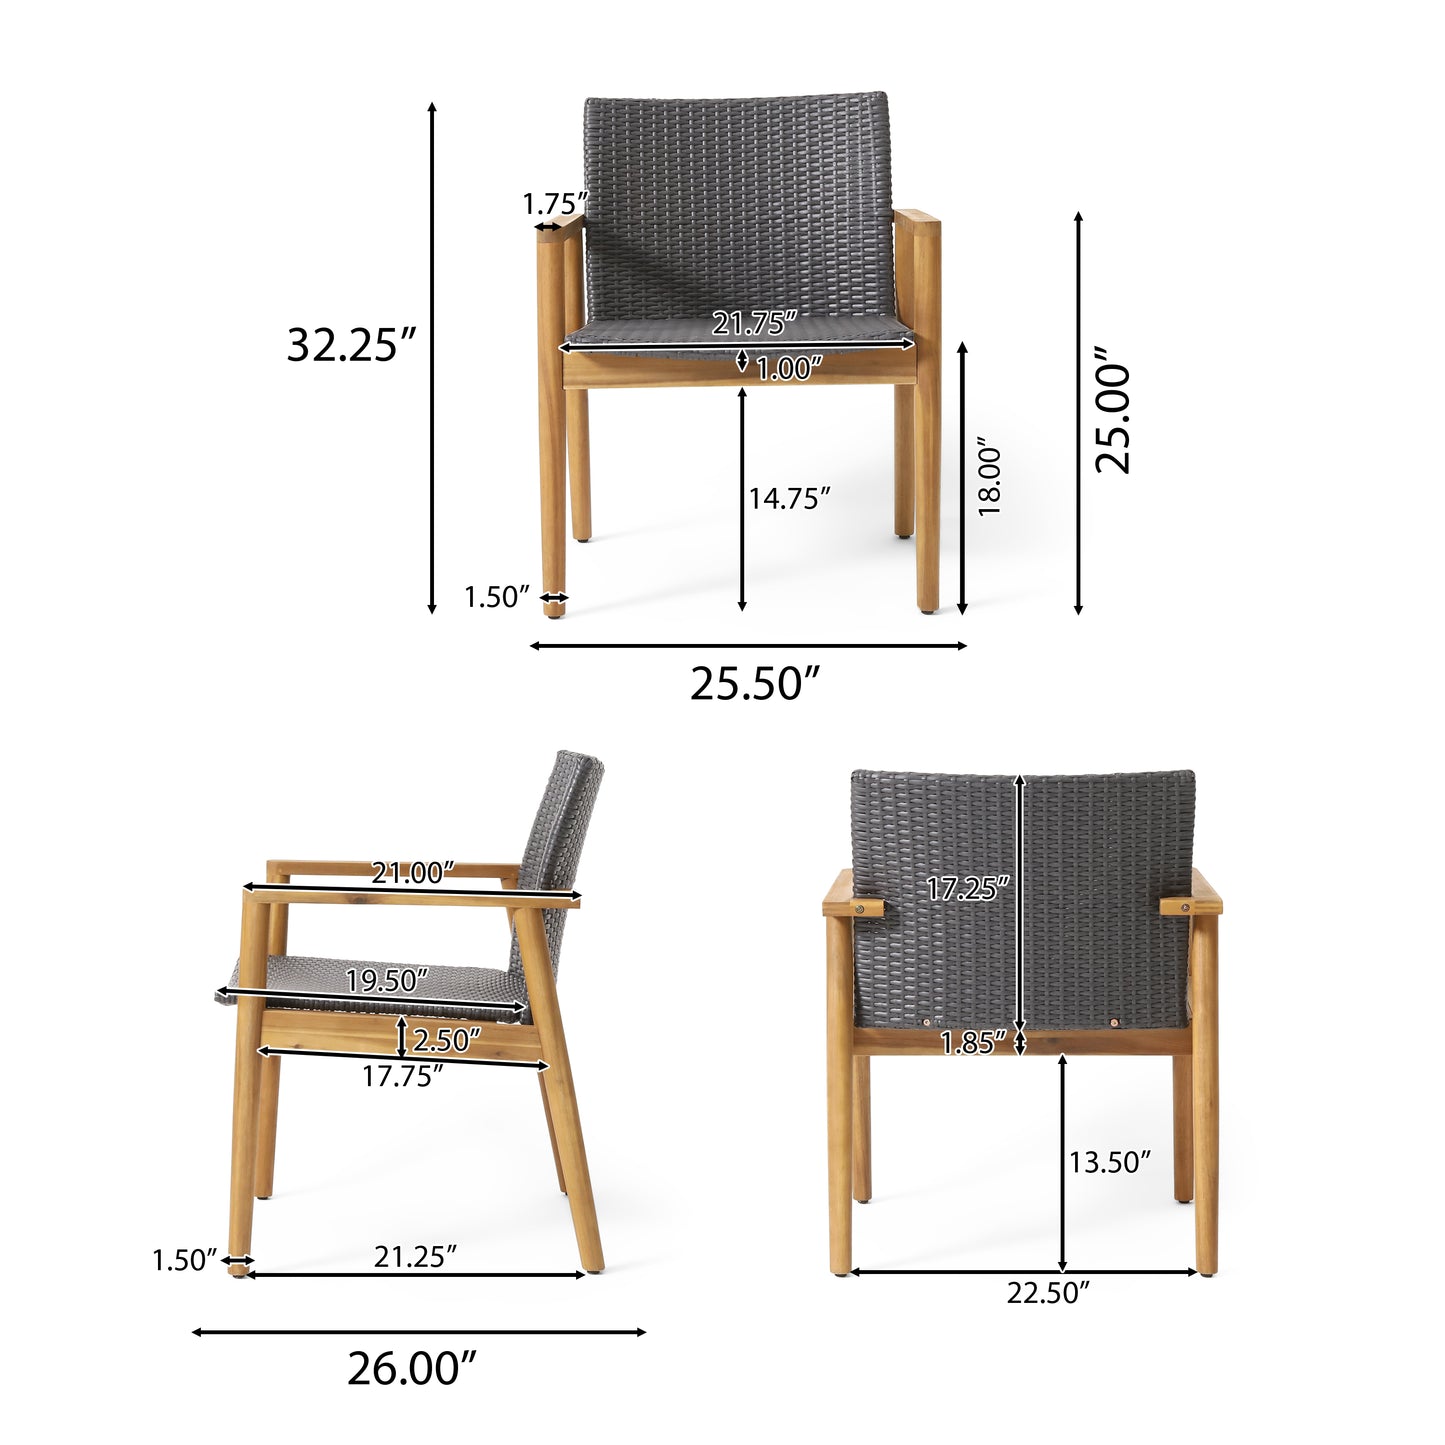 Alamosa Outdoor Wicker and Acacia Wood Club Chairs, Set of 2, Gray and Teak